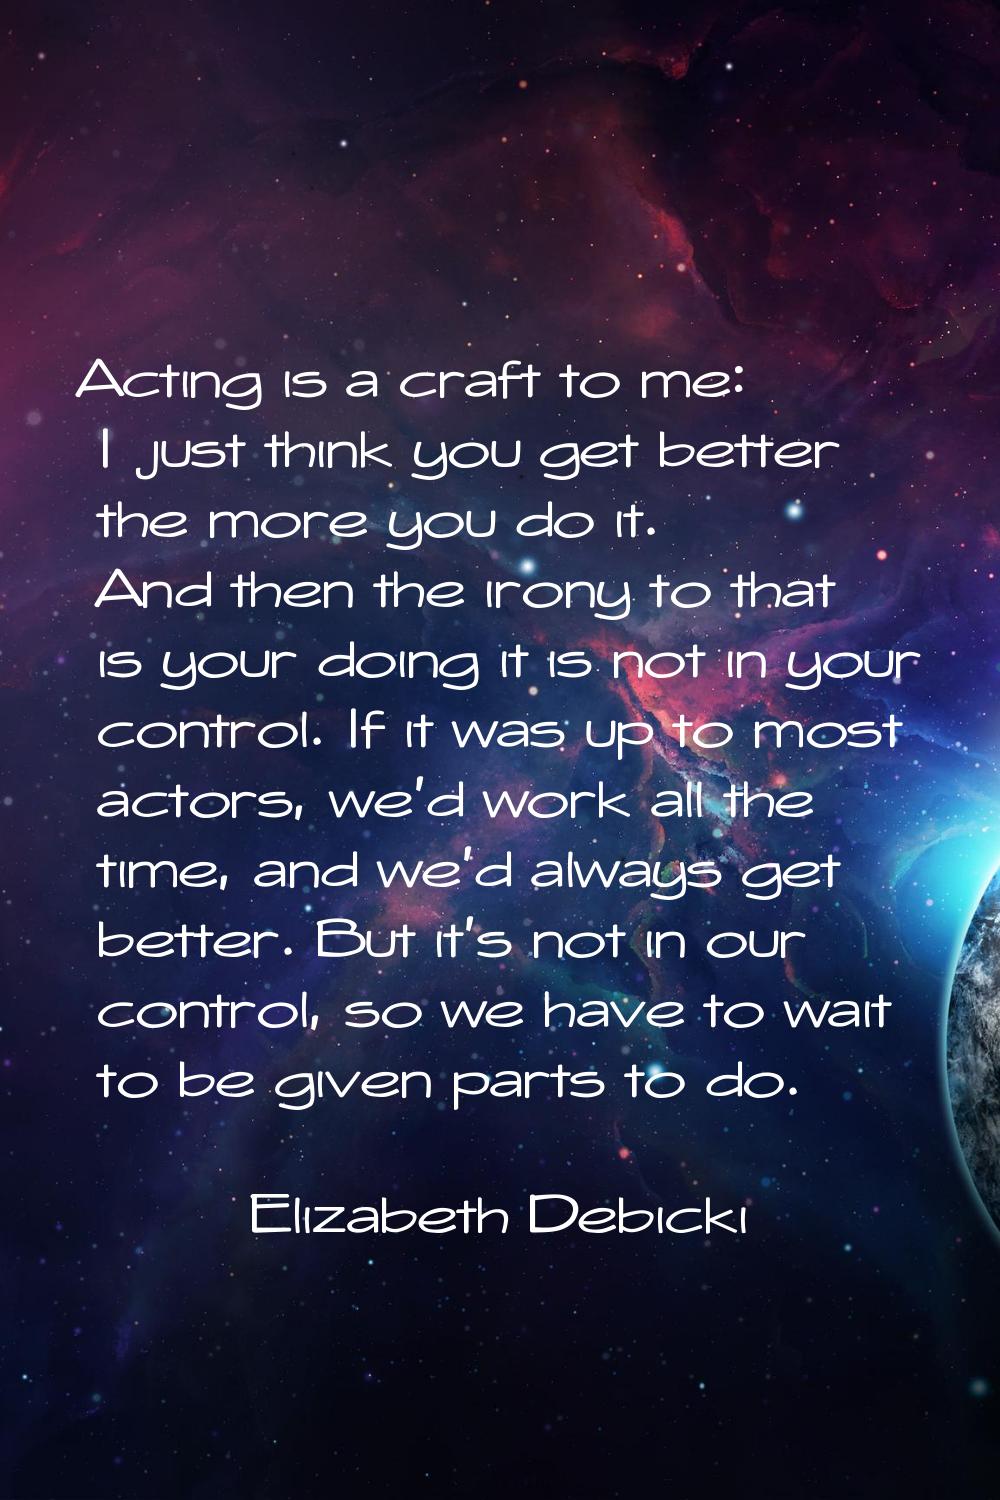 Acting is a craft to me: I just think you get better the more you do it. And then the irony to that